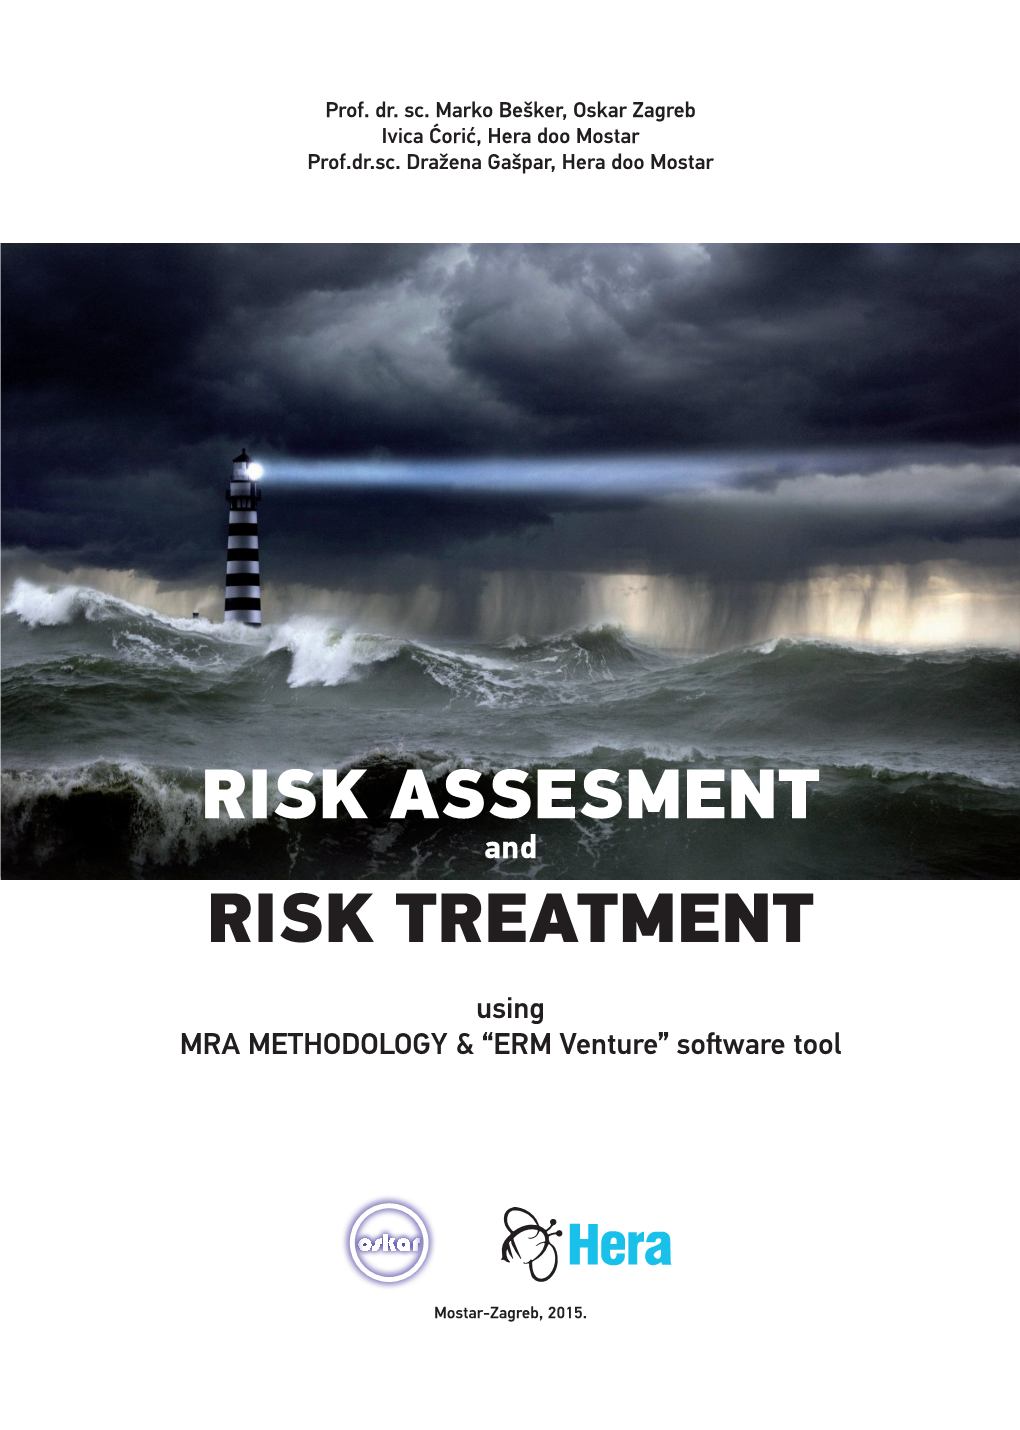 RISK ASSESMENT and RISK TREATMENT